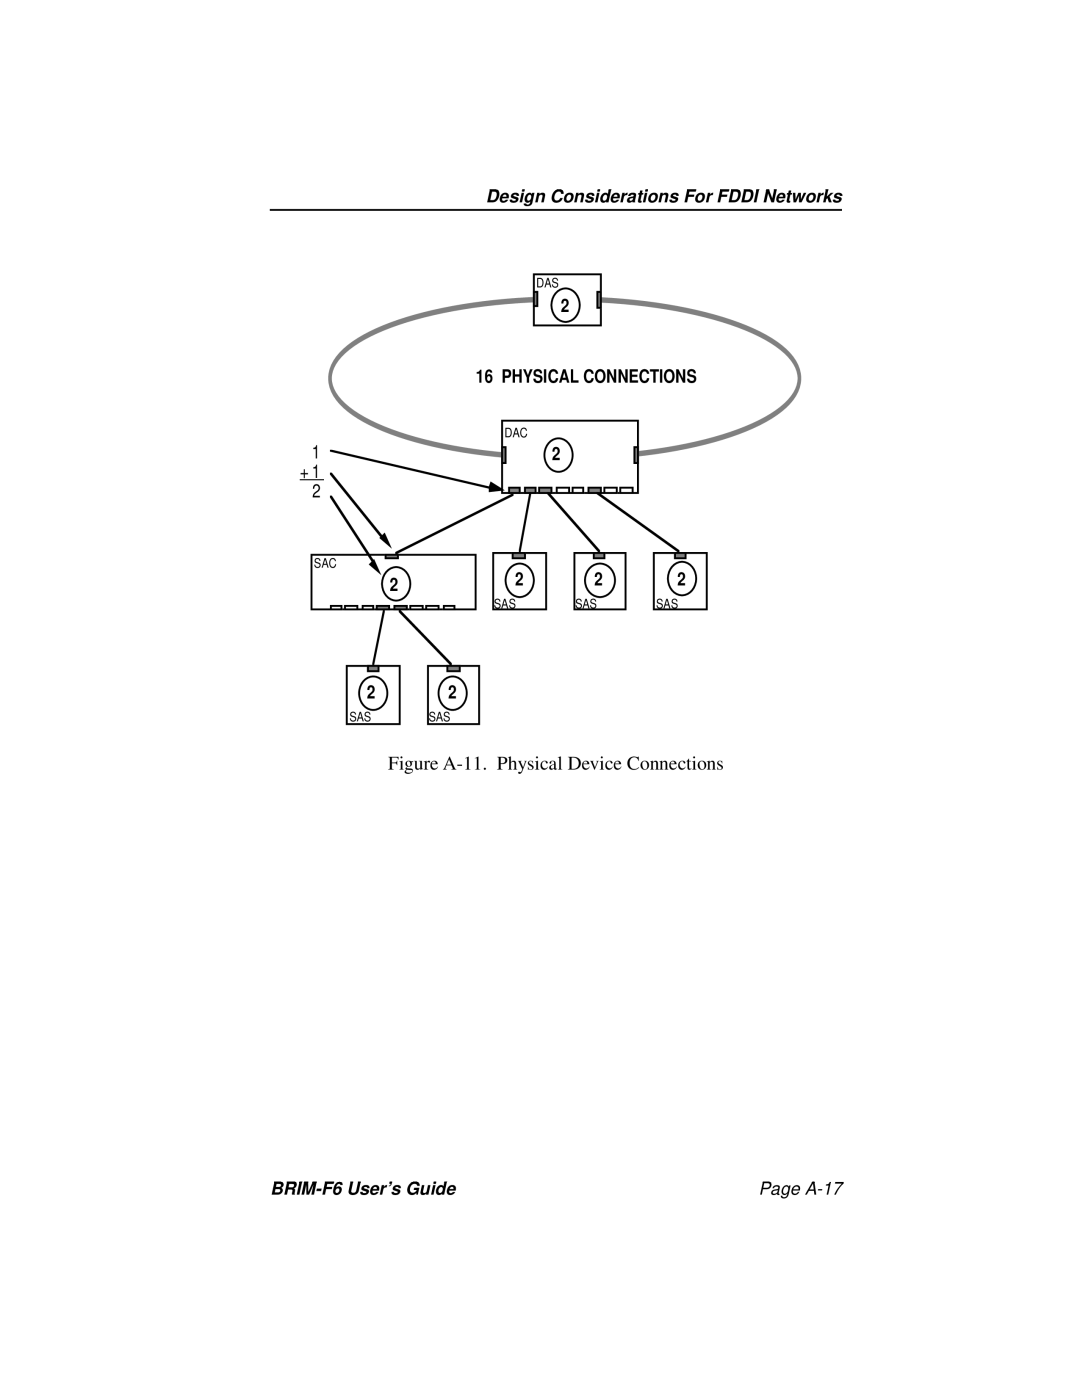 Cabletron Systems manual Figure A-11. Physical Device Connections, Physical Connections, BRIM-F6 User’s Guide, Page A-17 